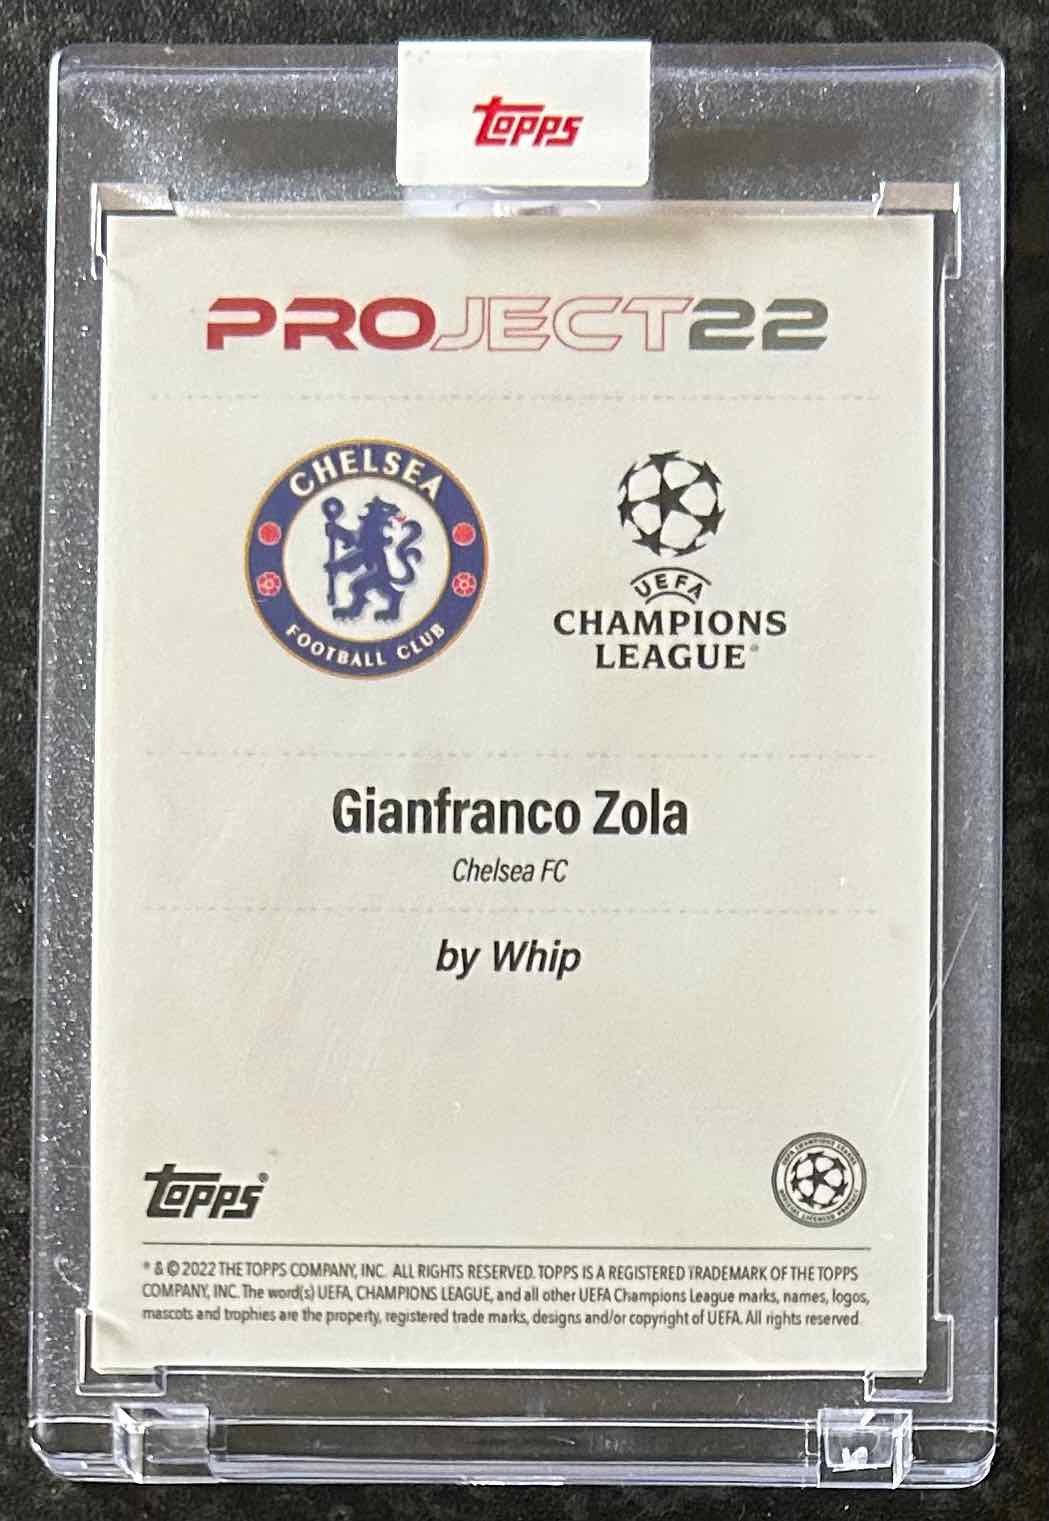 Gianfranco Zola (Chelsea FC) x Whip Topps Project 2022